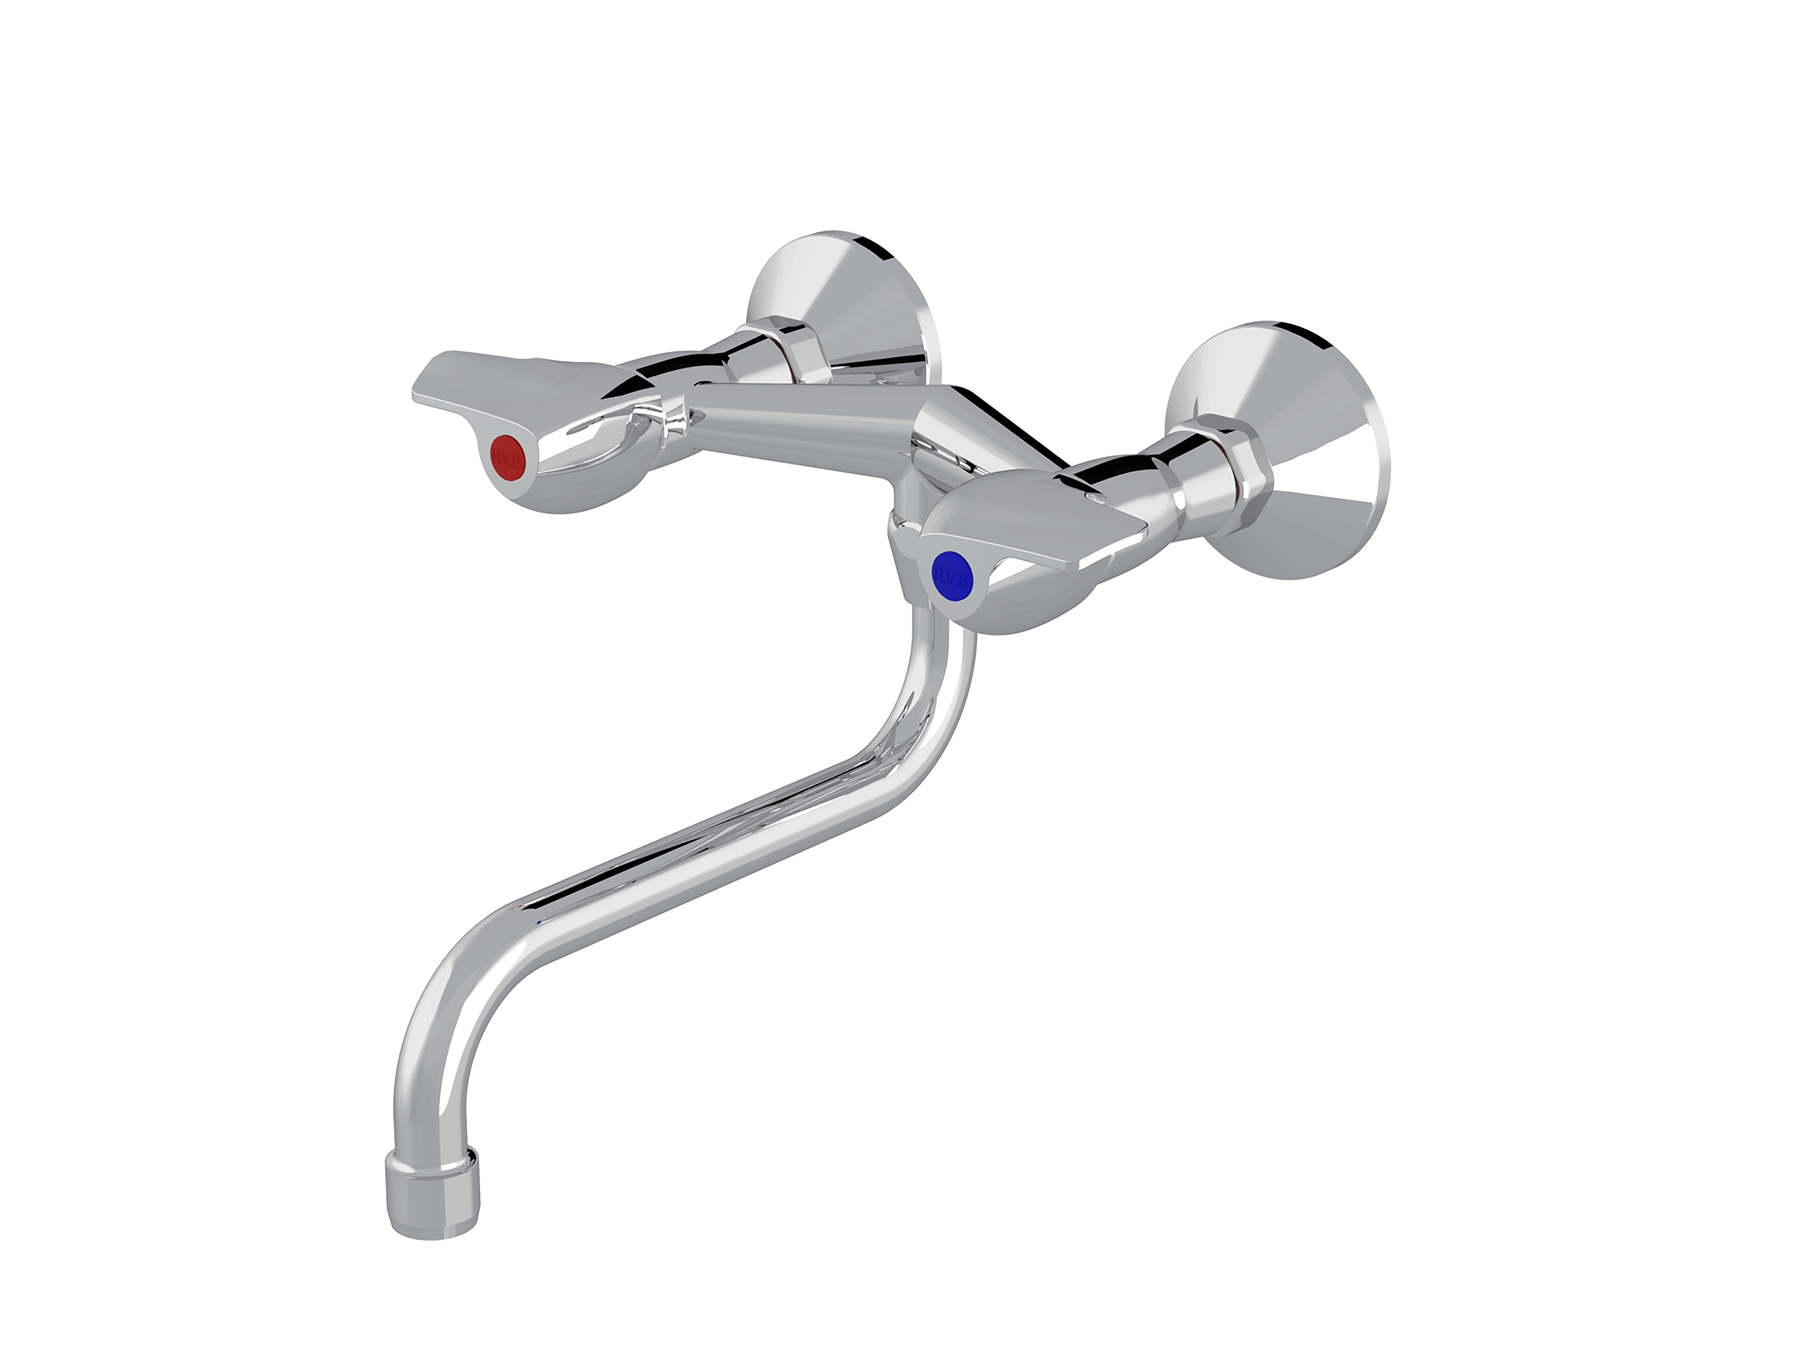 Wall-mounted kitchen mixer, spout under